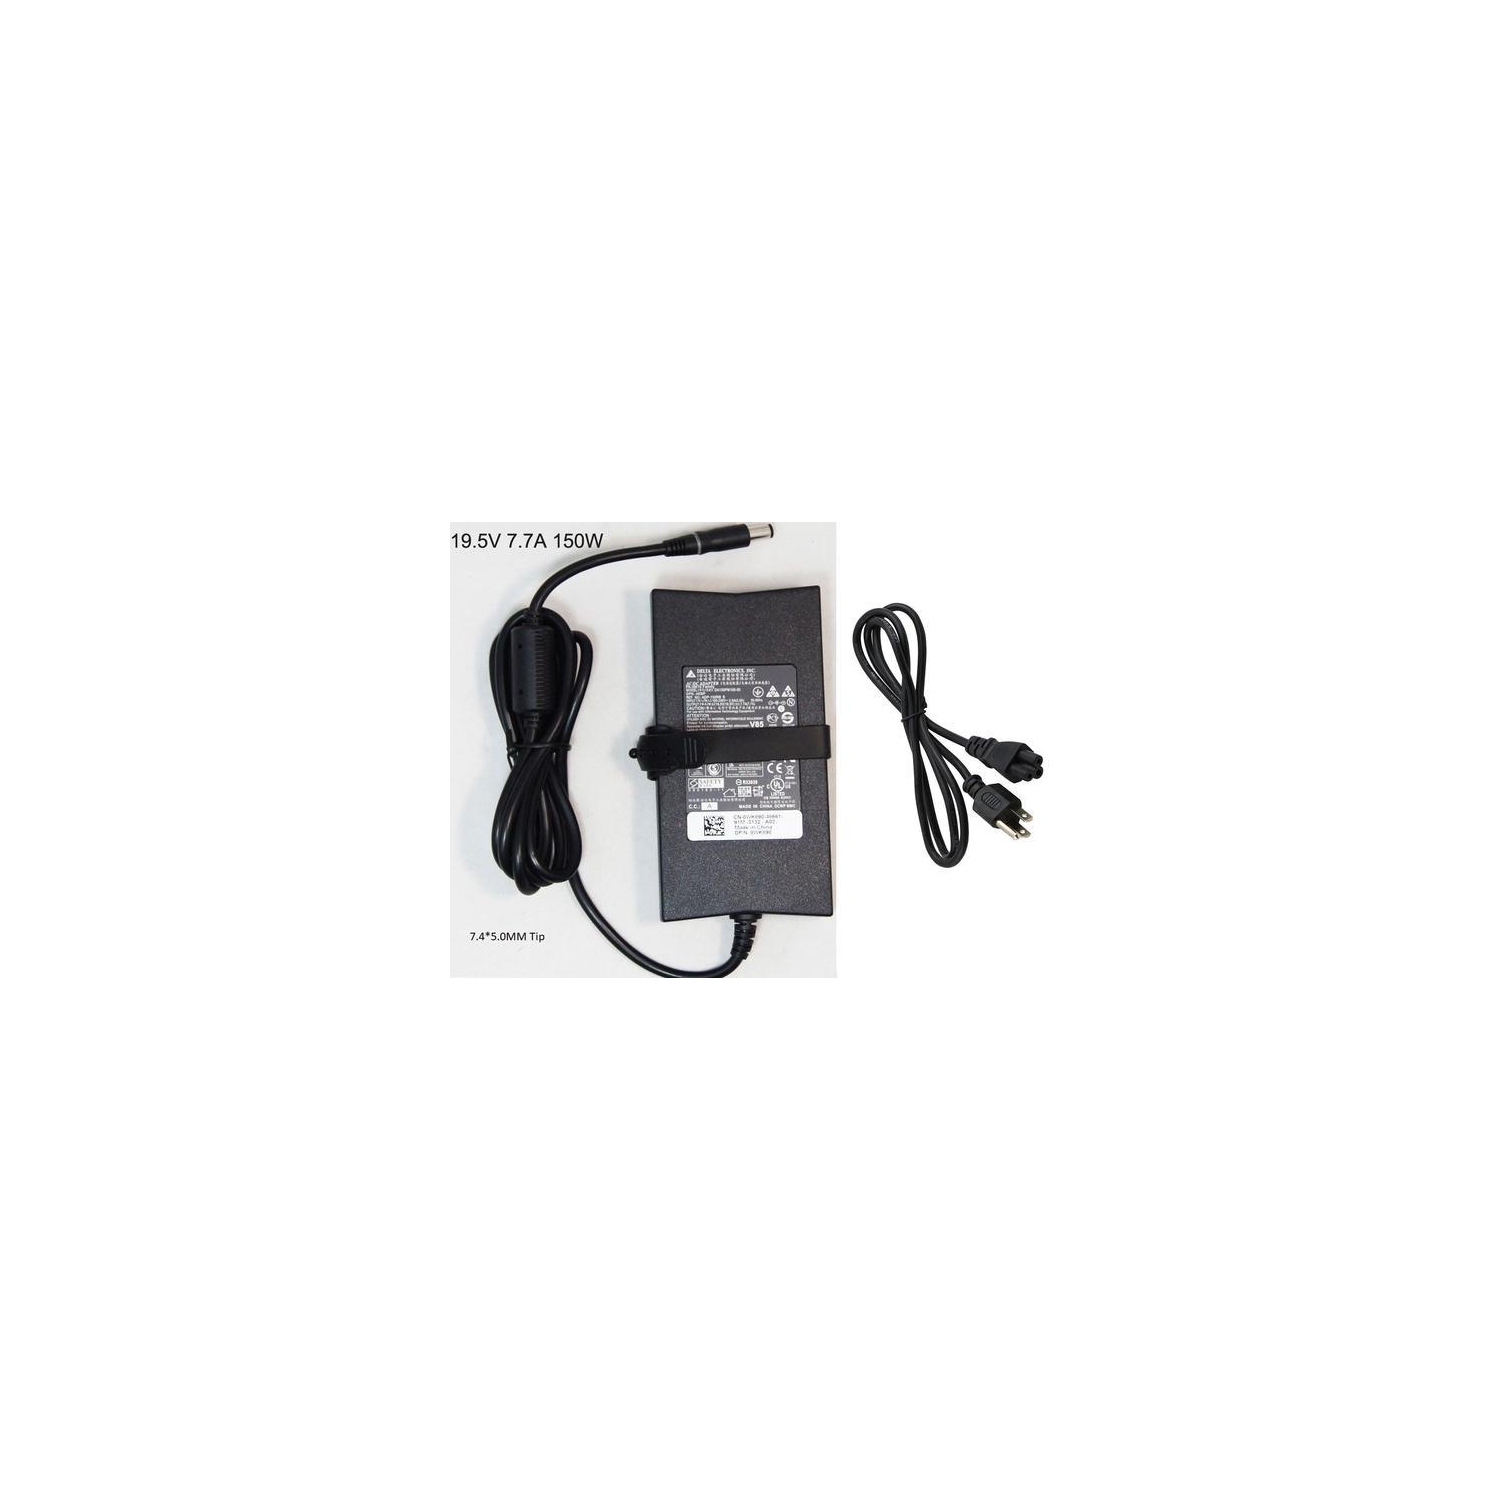 New Genuine Dell Alienware M14 M14x M14x R2 M15x M17x M17x R3 M17x R4 AC Adapter Charger 150W